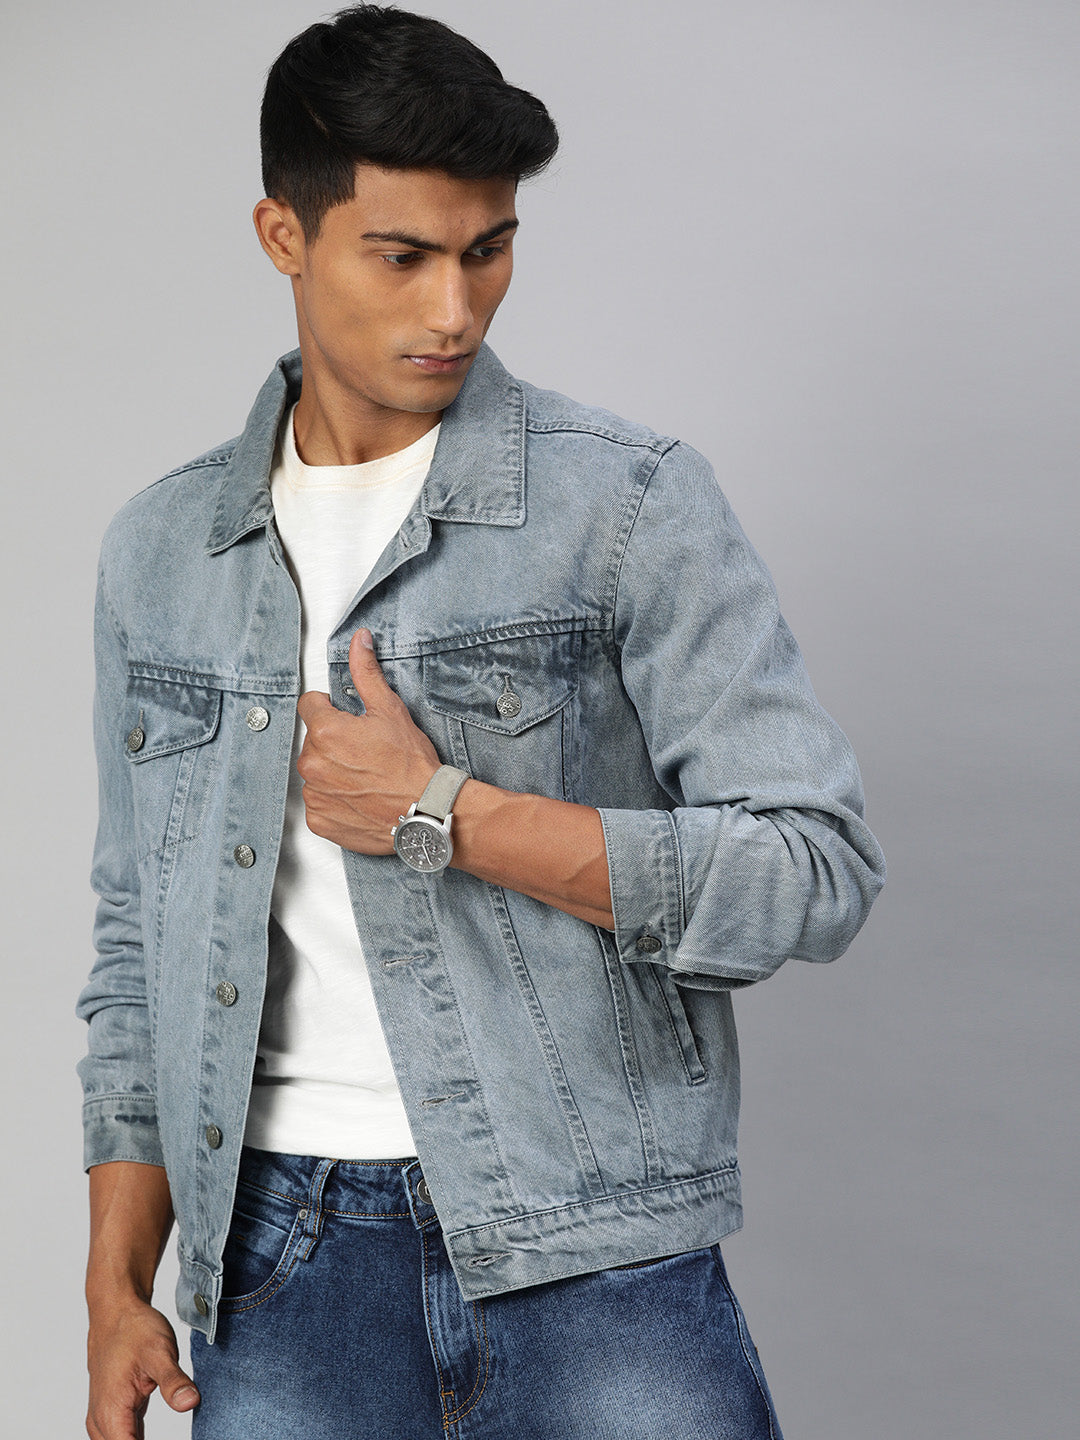 How to Wear a Denim Jacket for Men - The Trend Spotter